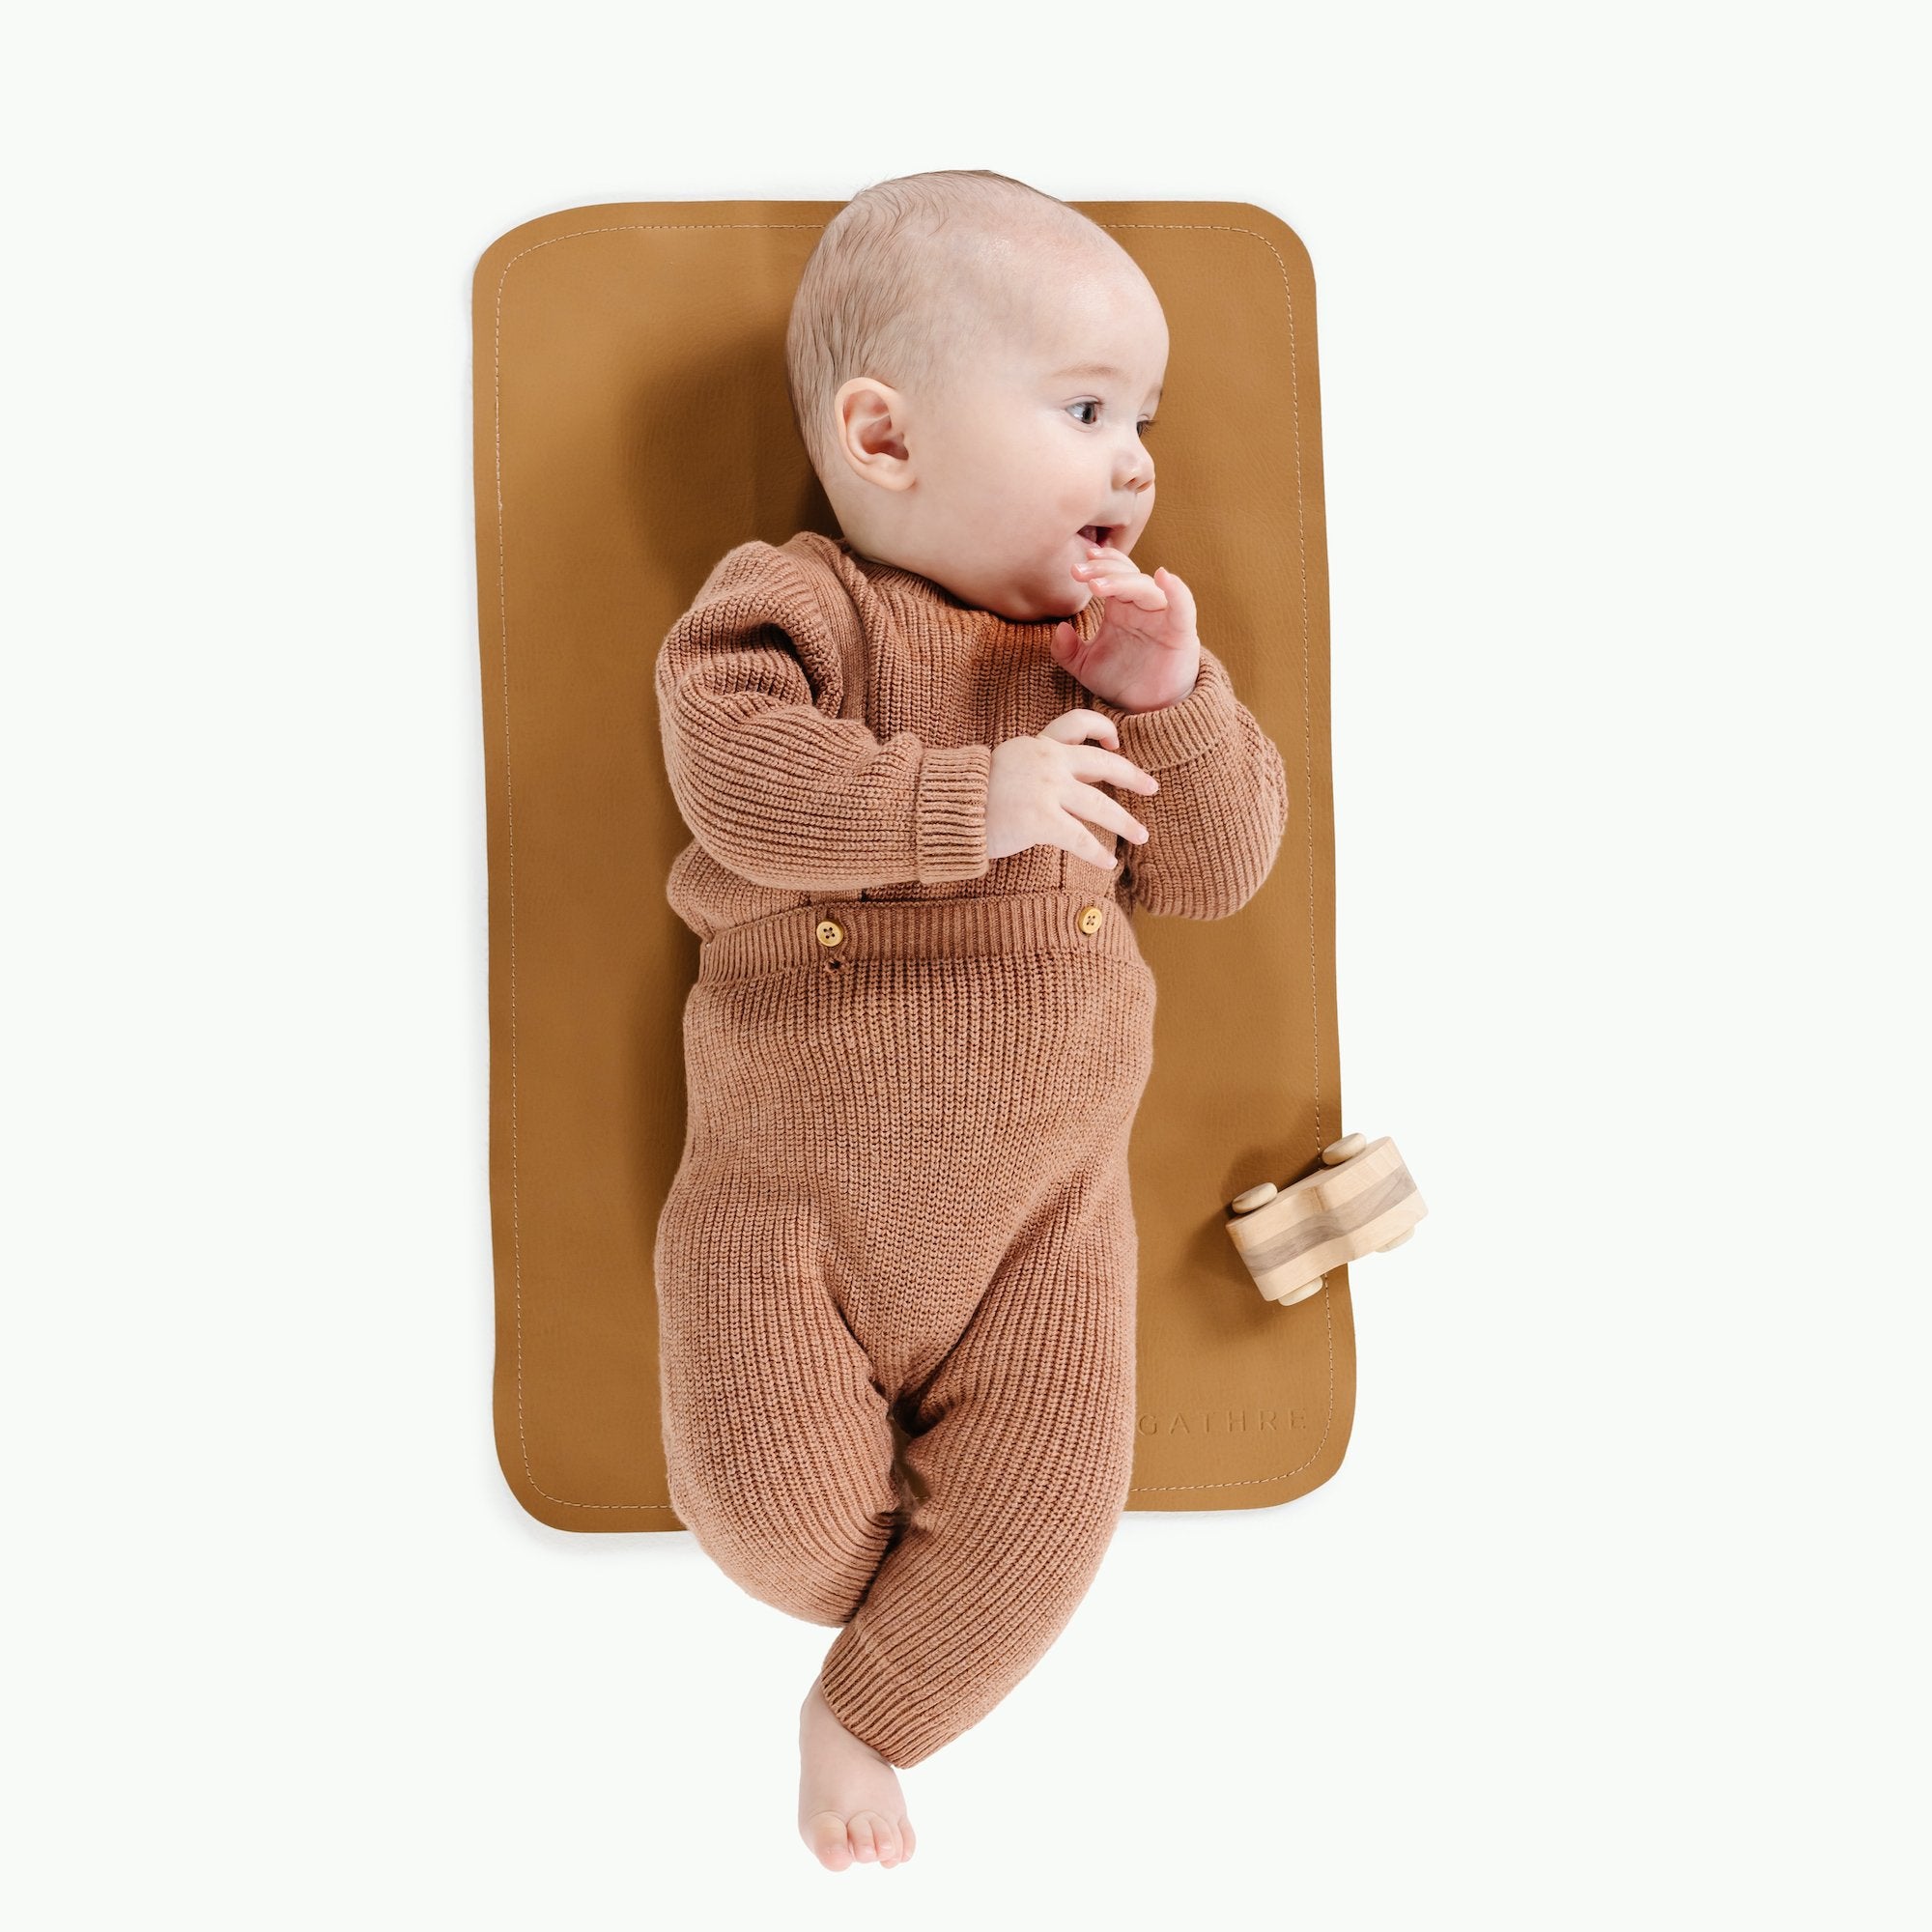 Camel@Overhead baby sitting on the Camel Micro mat 